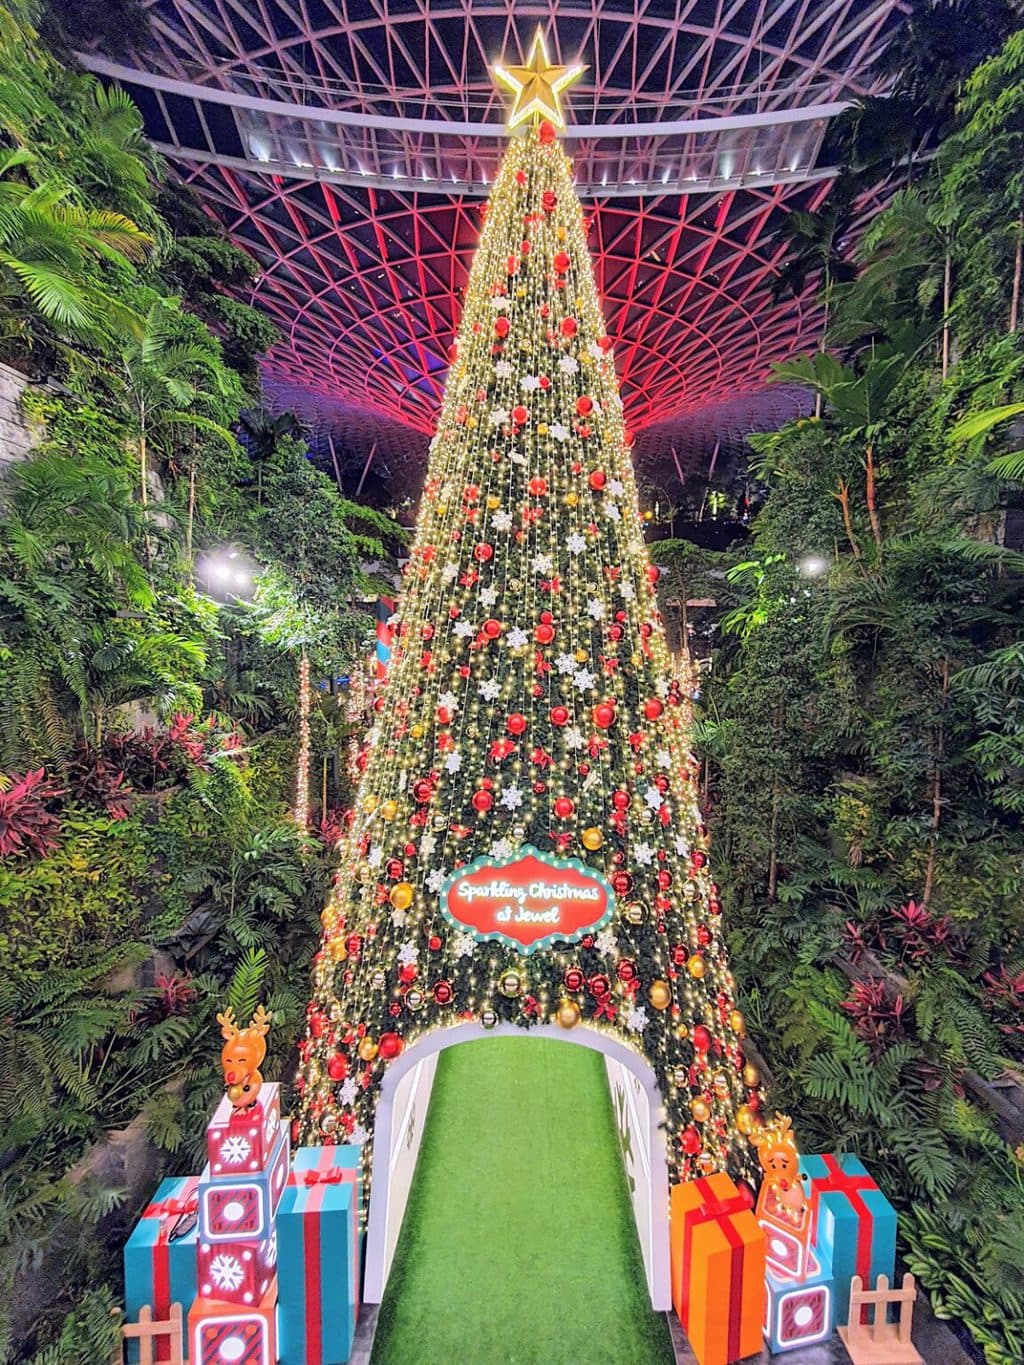 2020 Christmas in Singapore Events, lights and activities to feel the